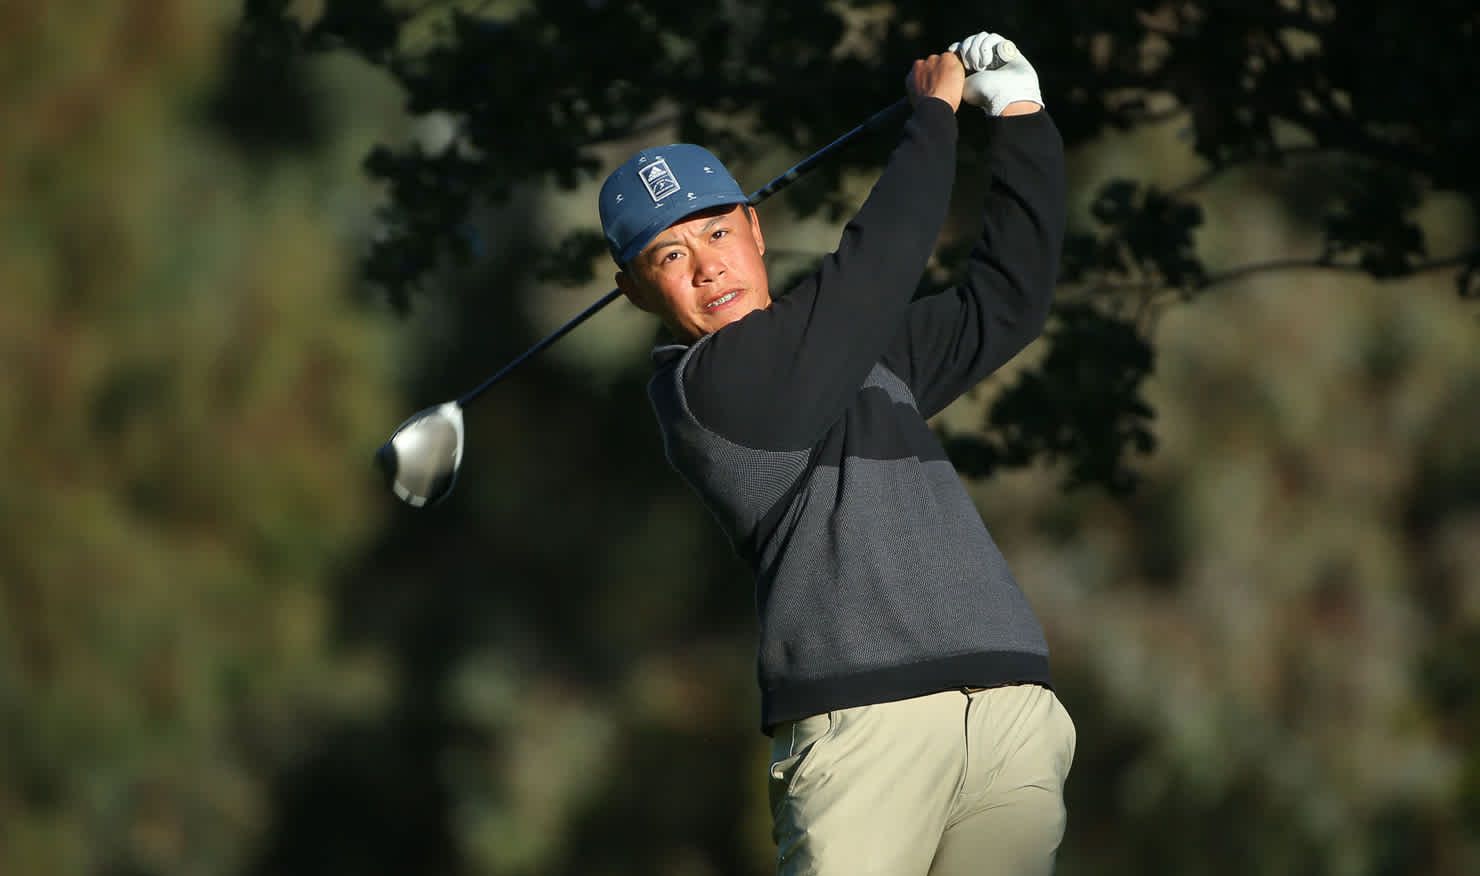 Jeffrey Guan launches into a drive at Gold Creek today. Picture: DAVID TEASE